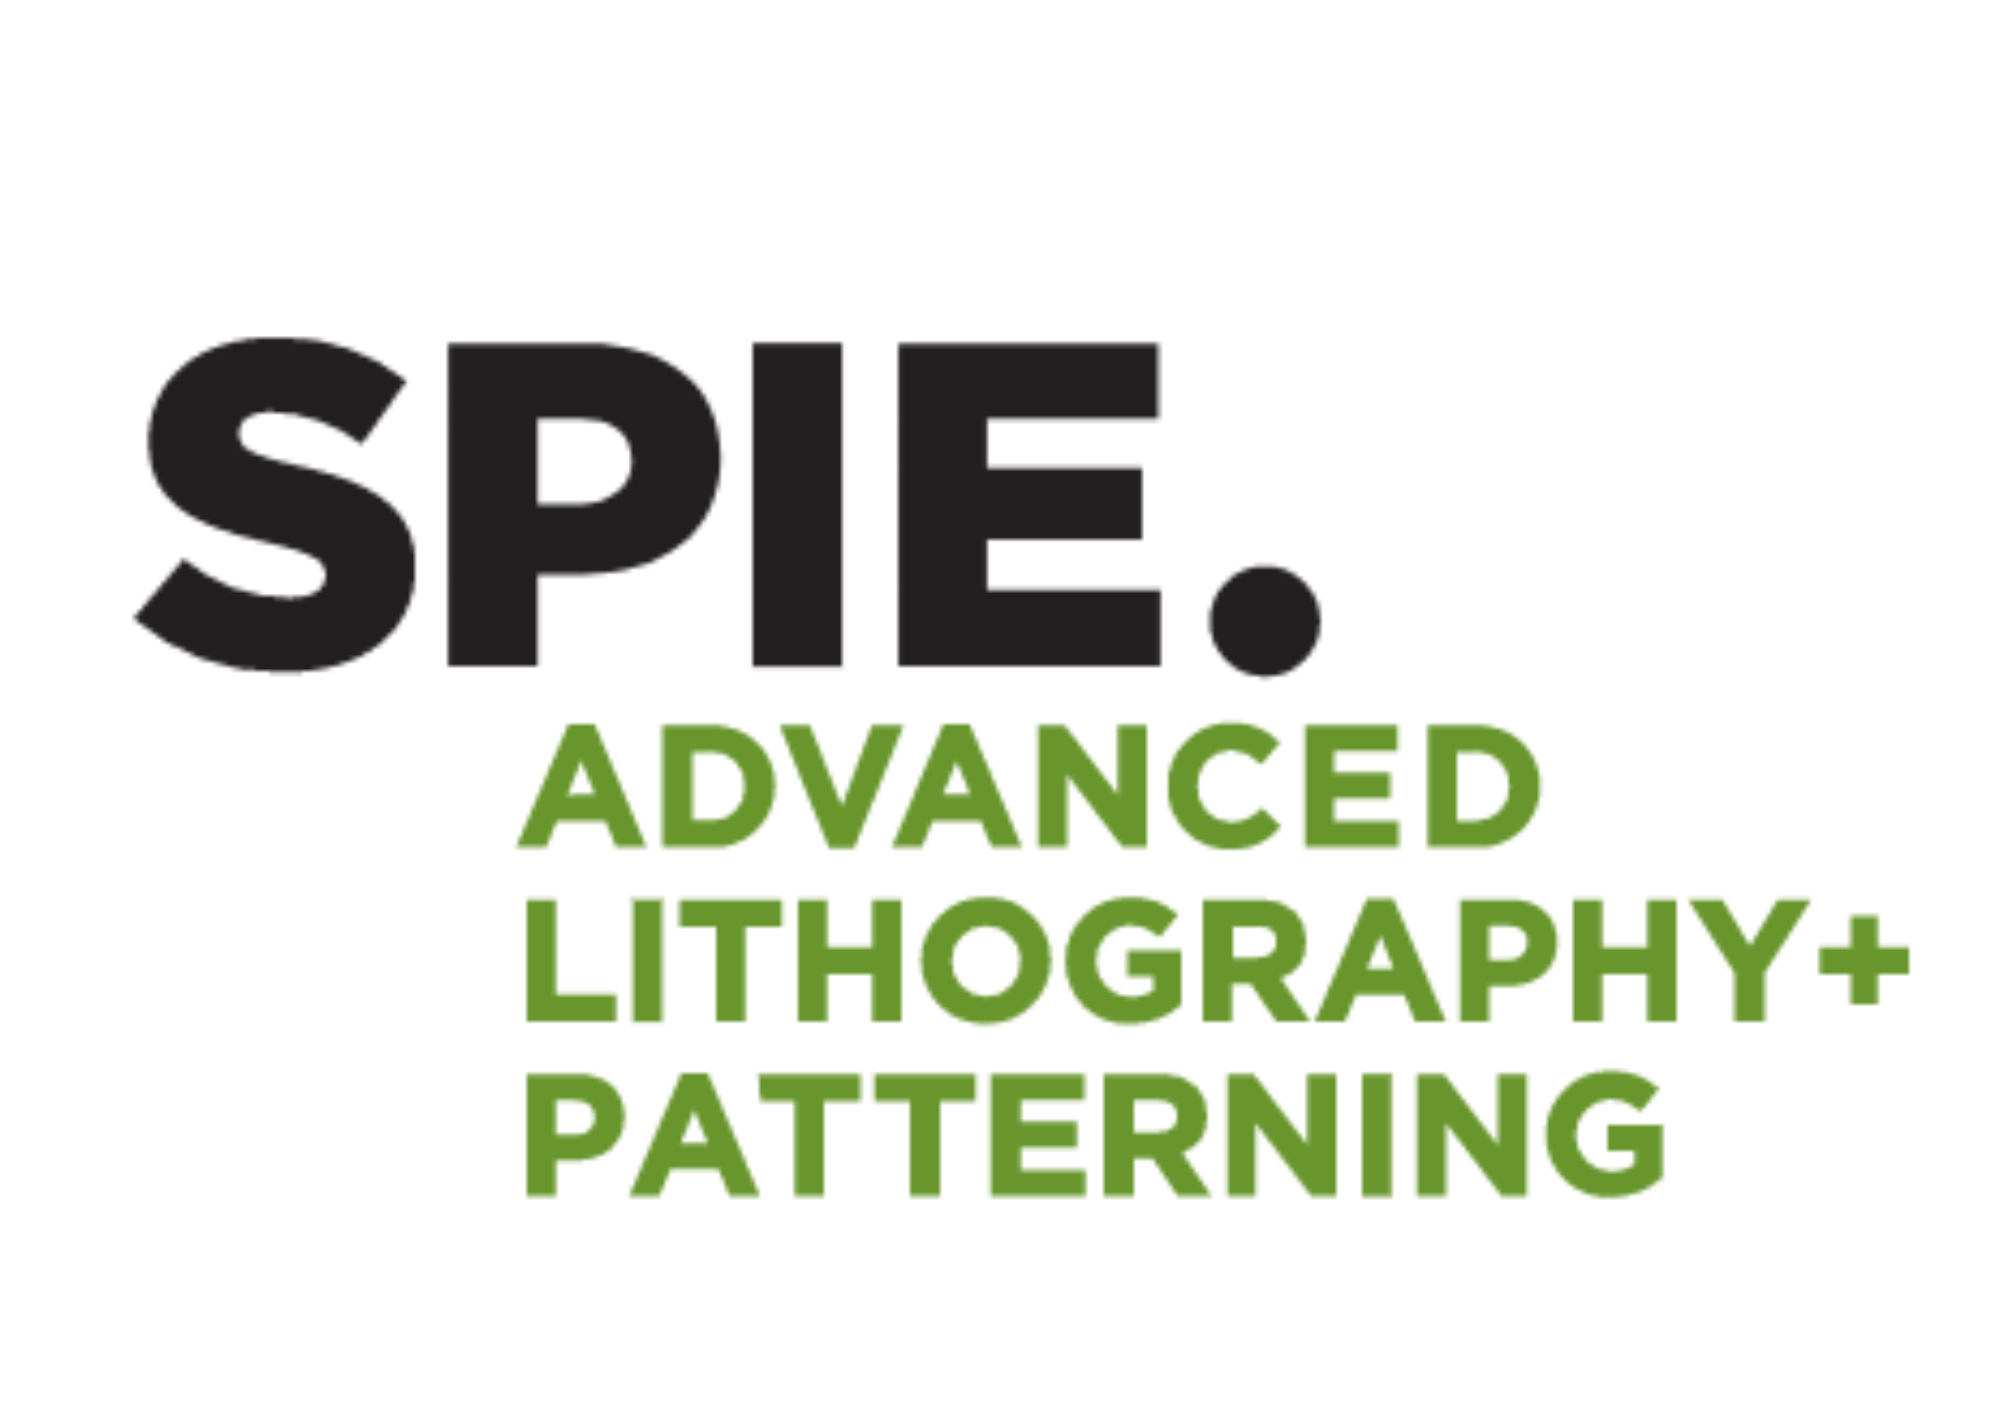 SPIE Advance Lithography + Patterning